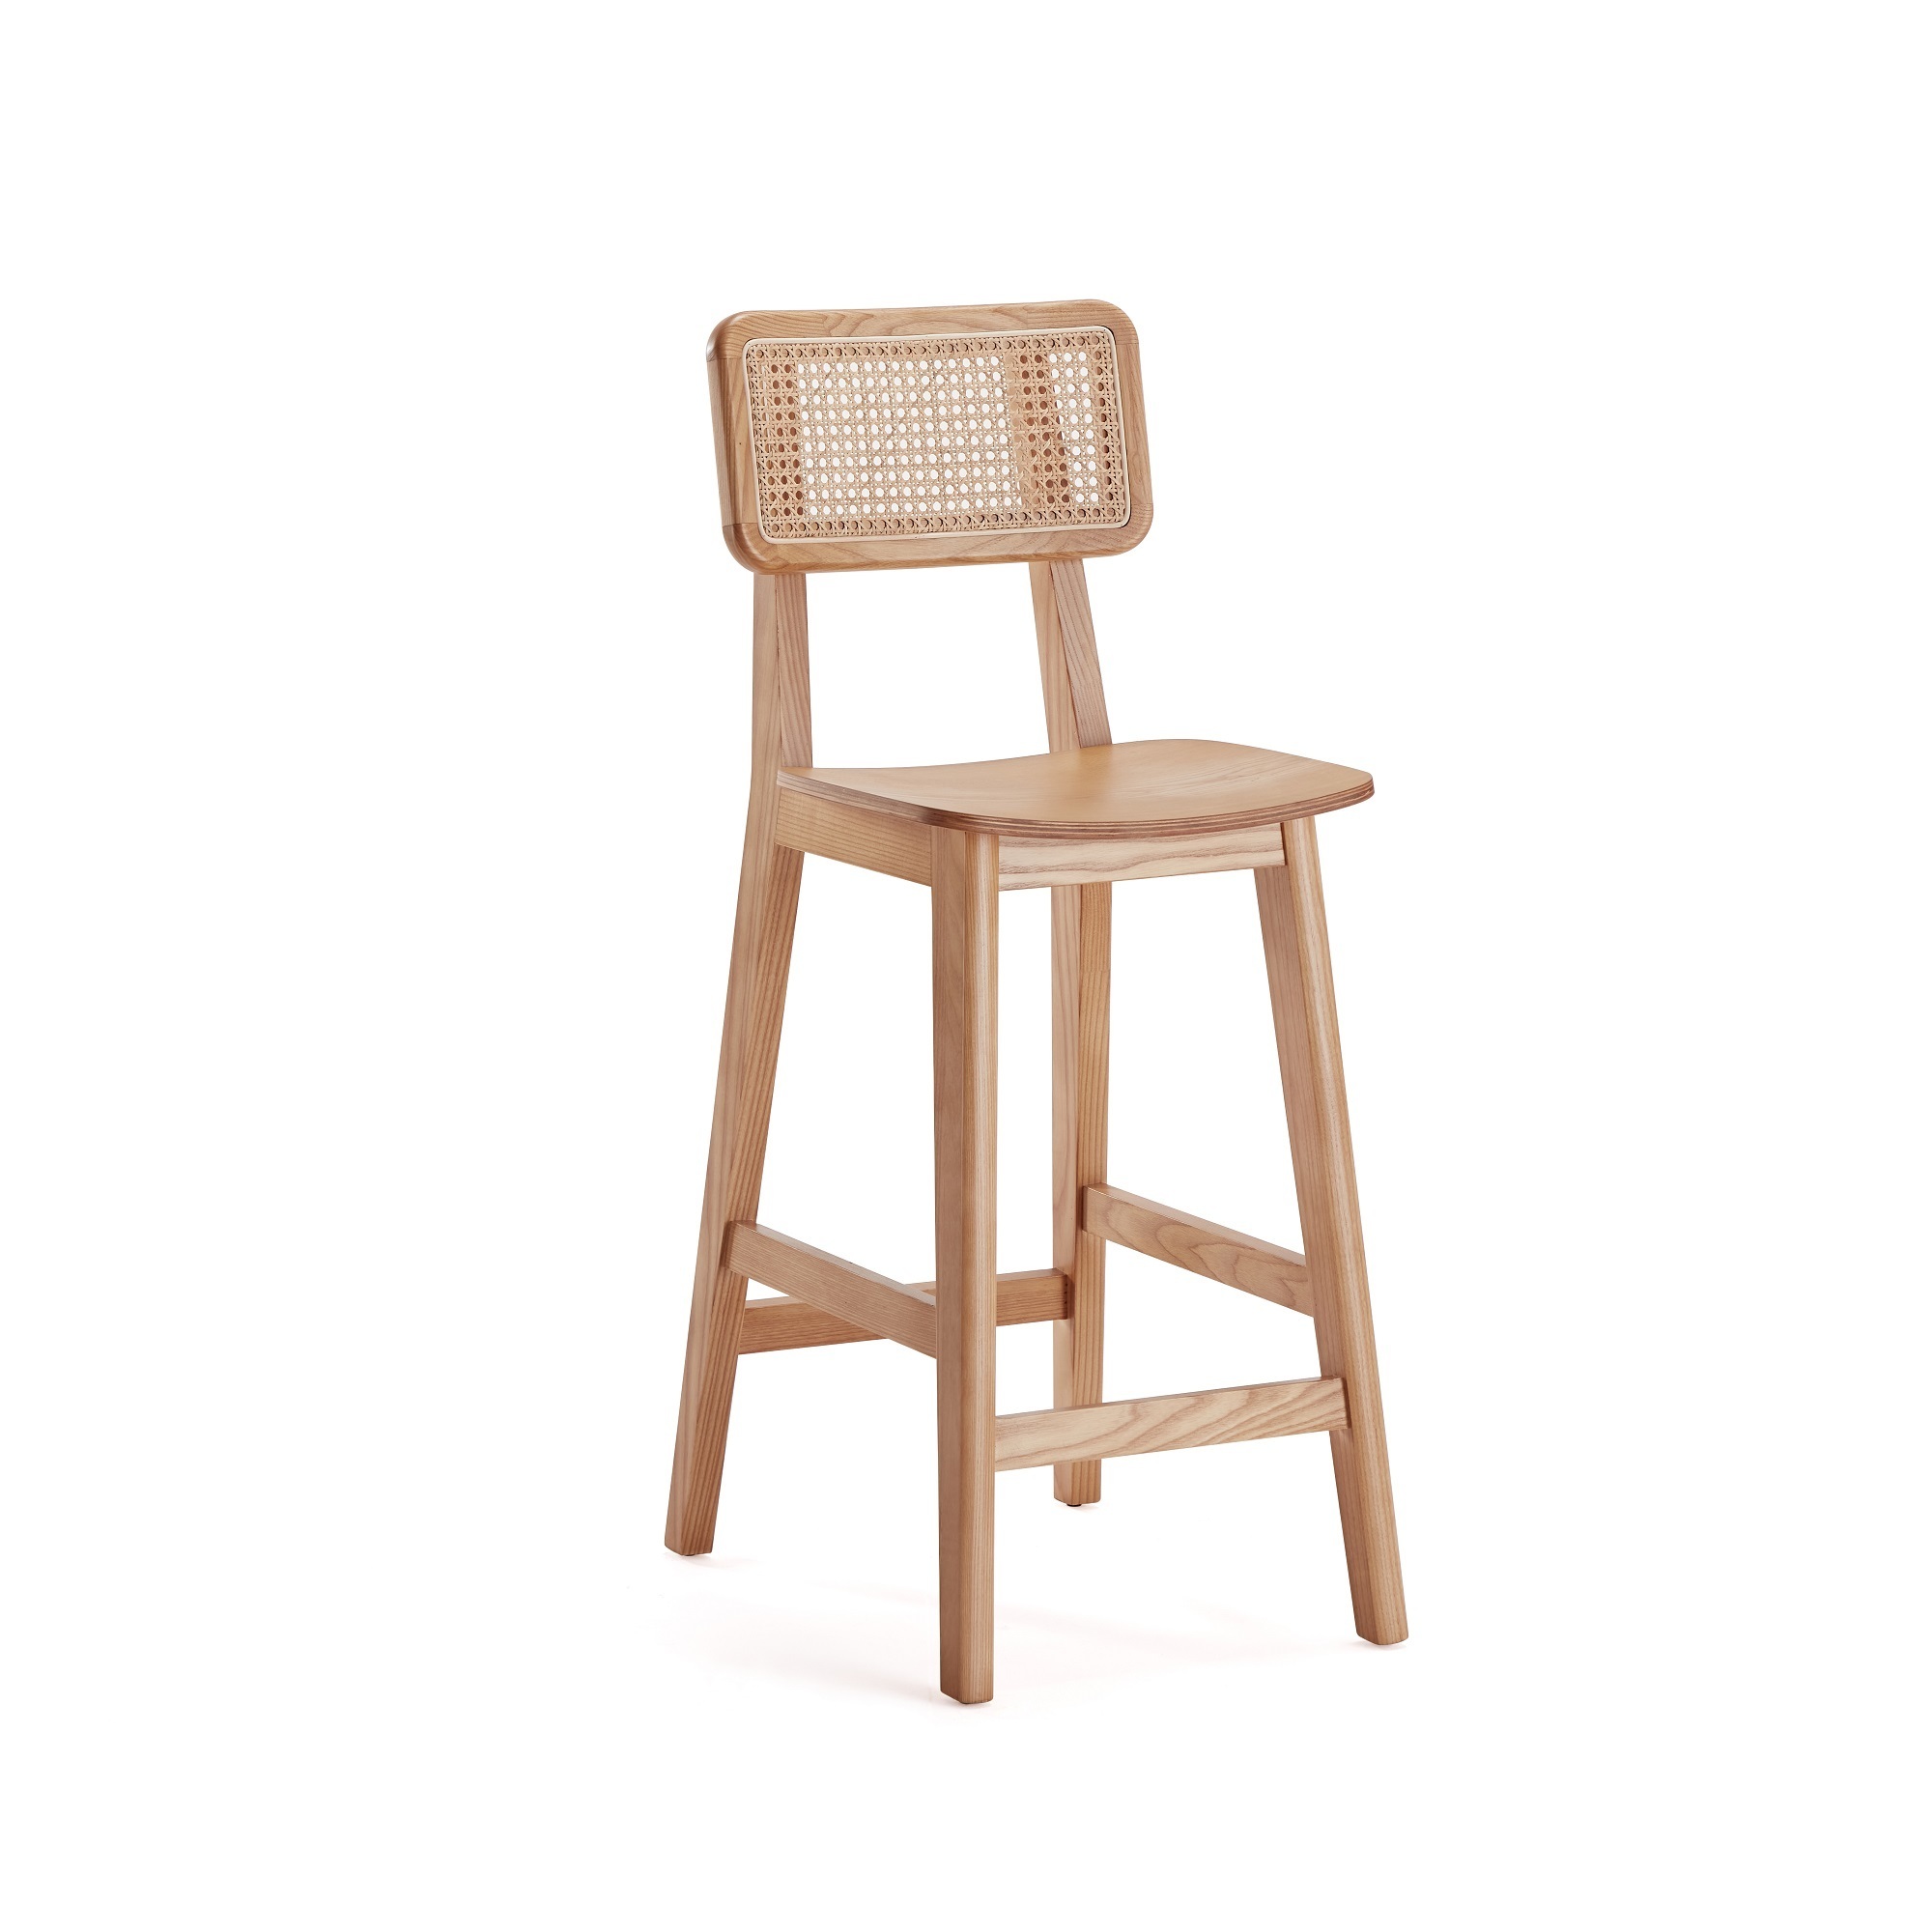 Manhattan Comfort, Versailles Counter Stool in Nature Cane, Primary Color Natural, Included (qty.) 1 Model CSCA01